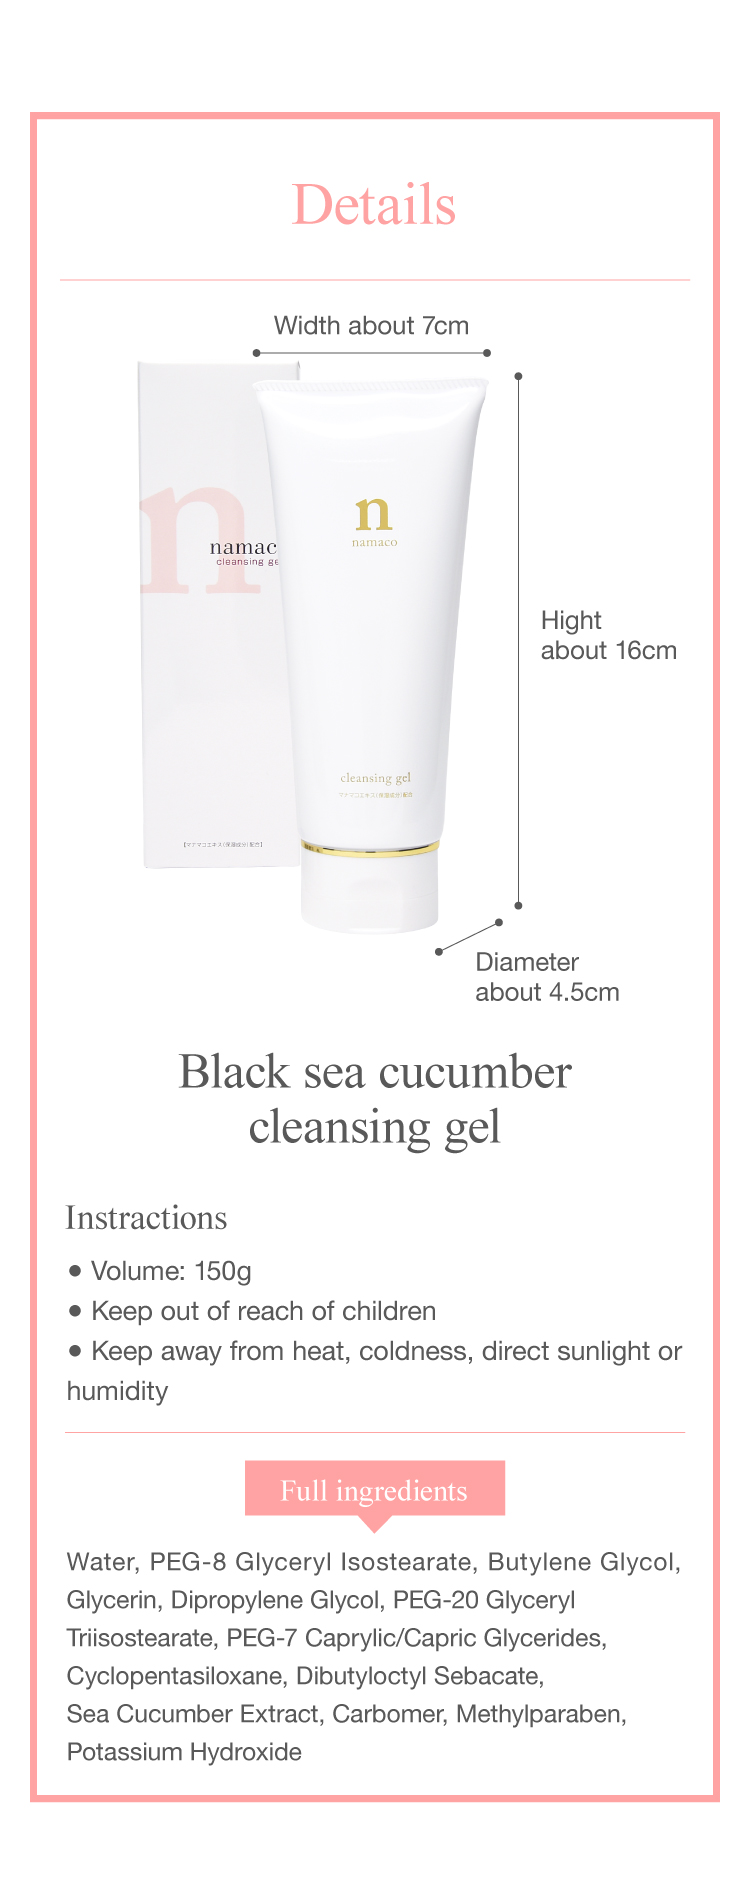 The dimensions of the black sea cucumber cleansing gel 150g are Hight about 16cm, Diameter about 4.5cm